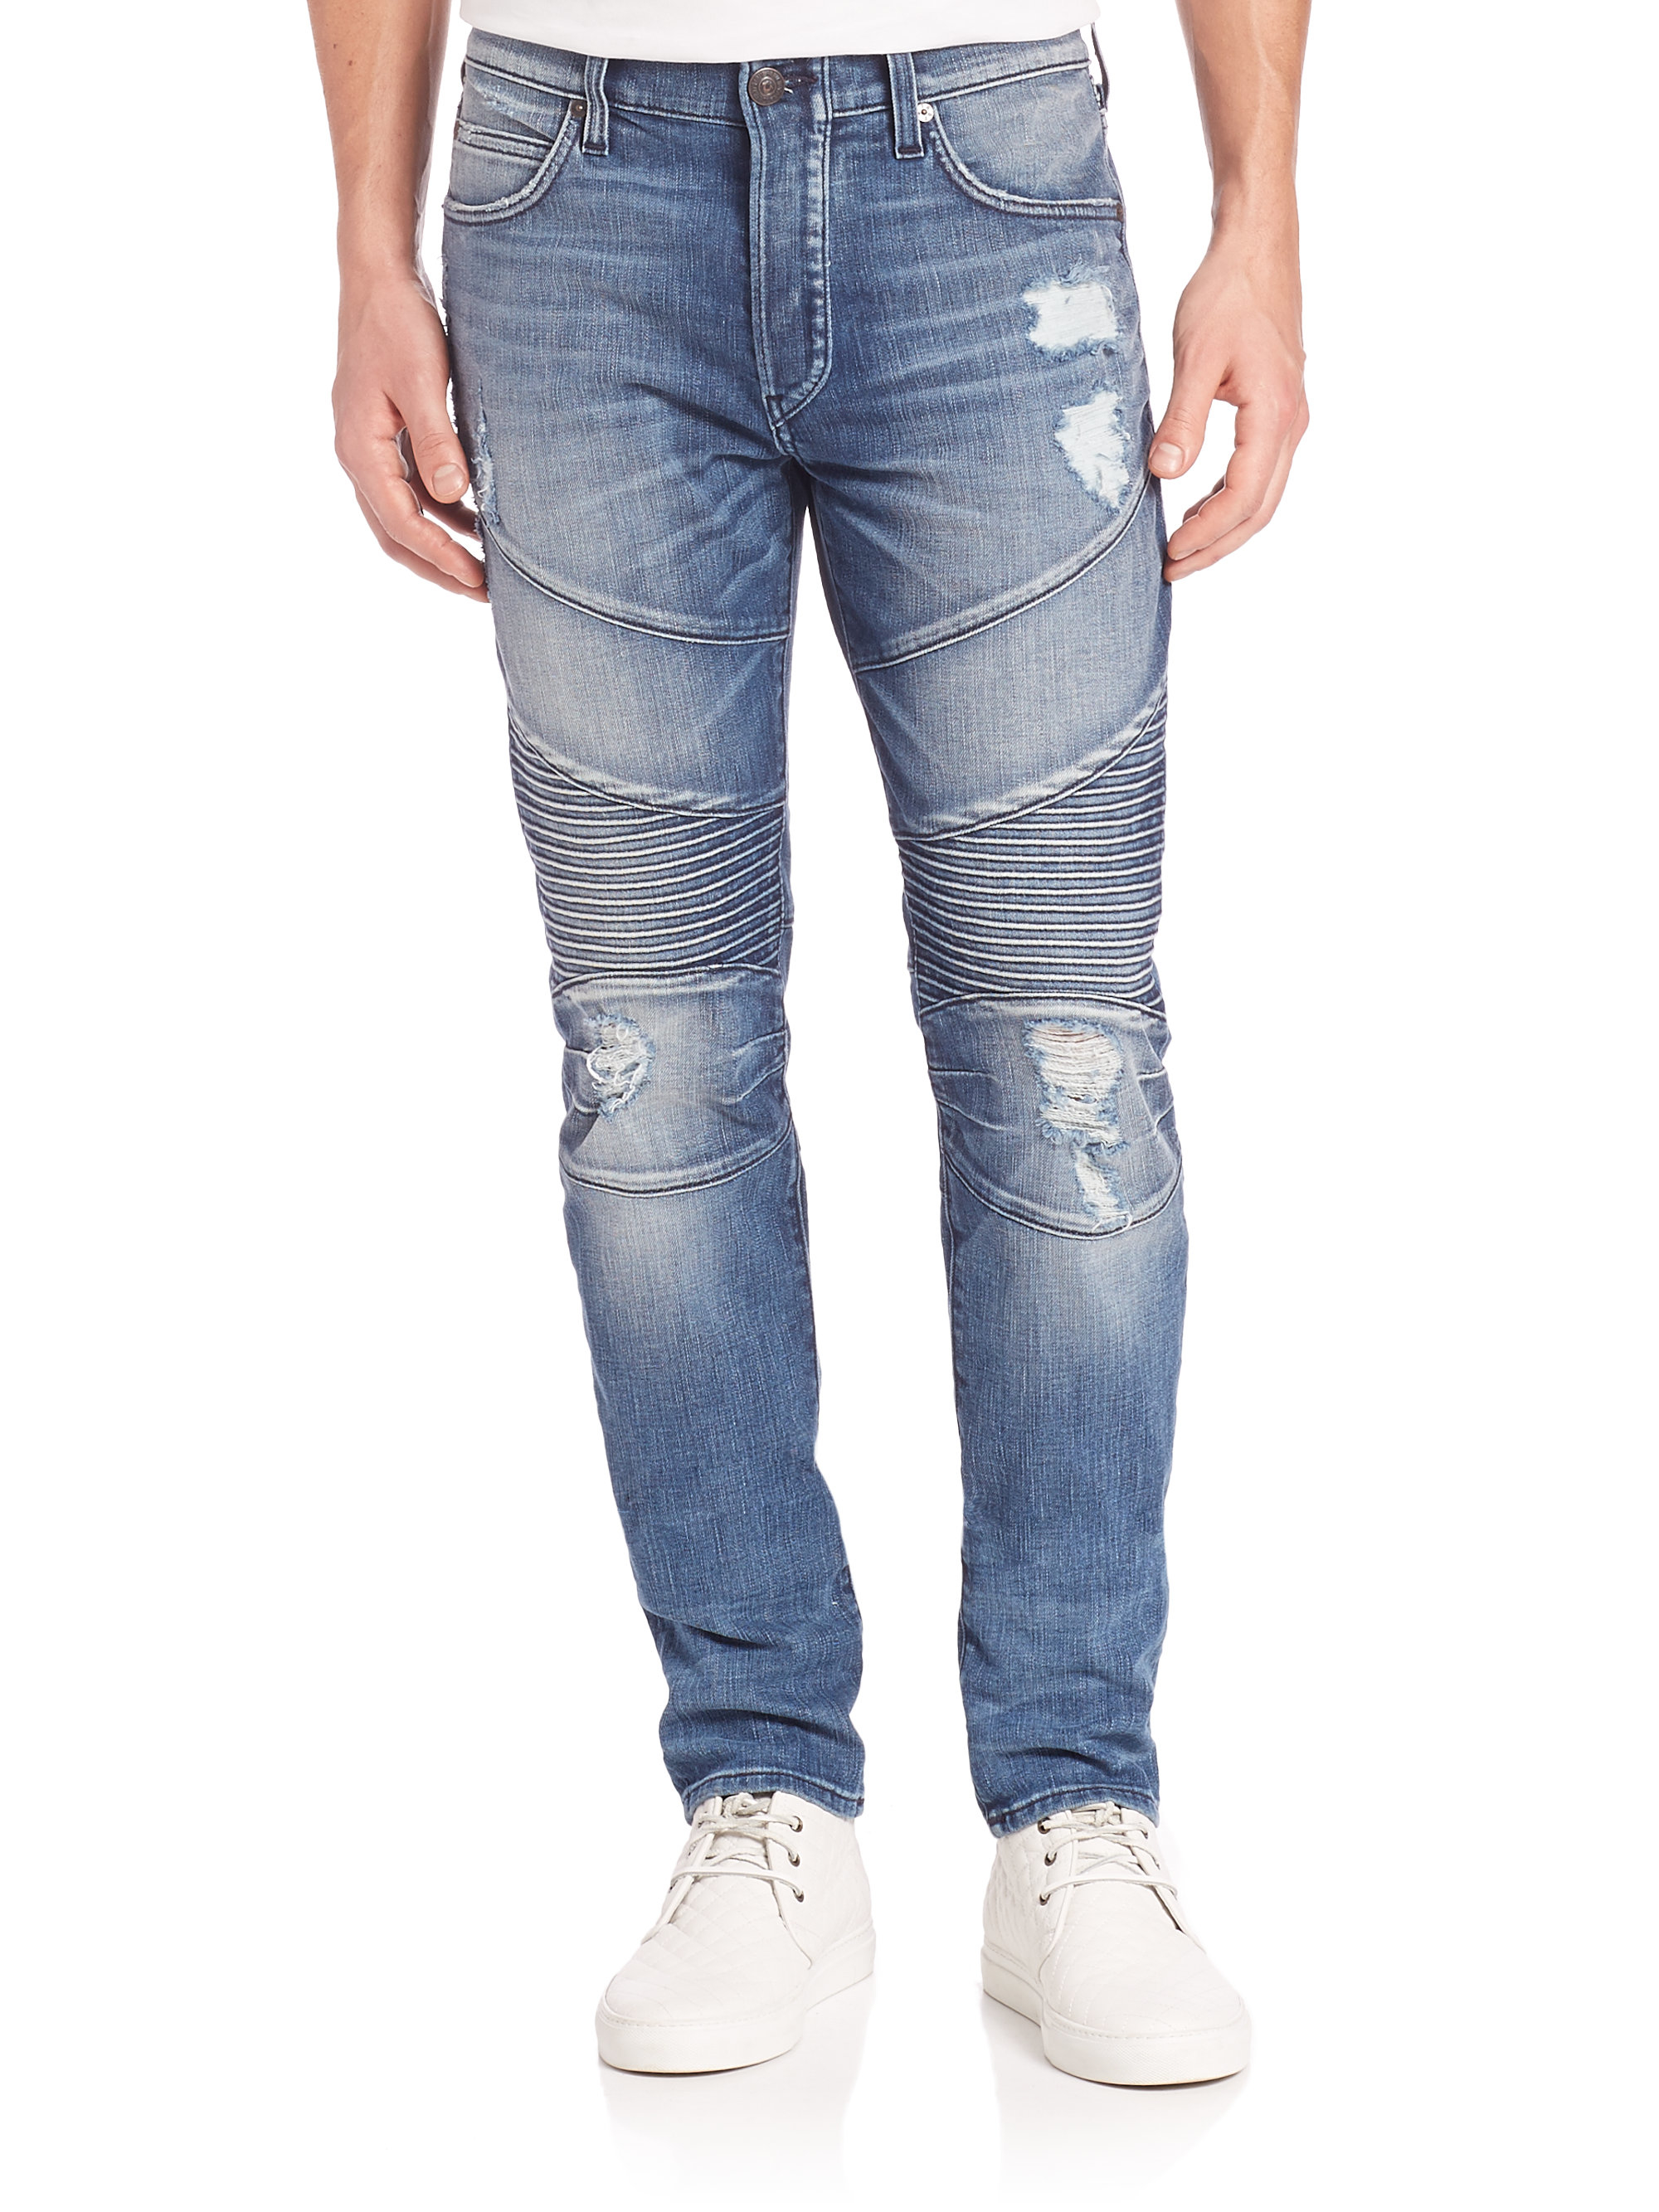 True religion Rocco Moto Relaxed Skinny Flagstone Jeans in